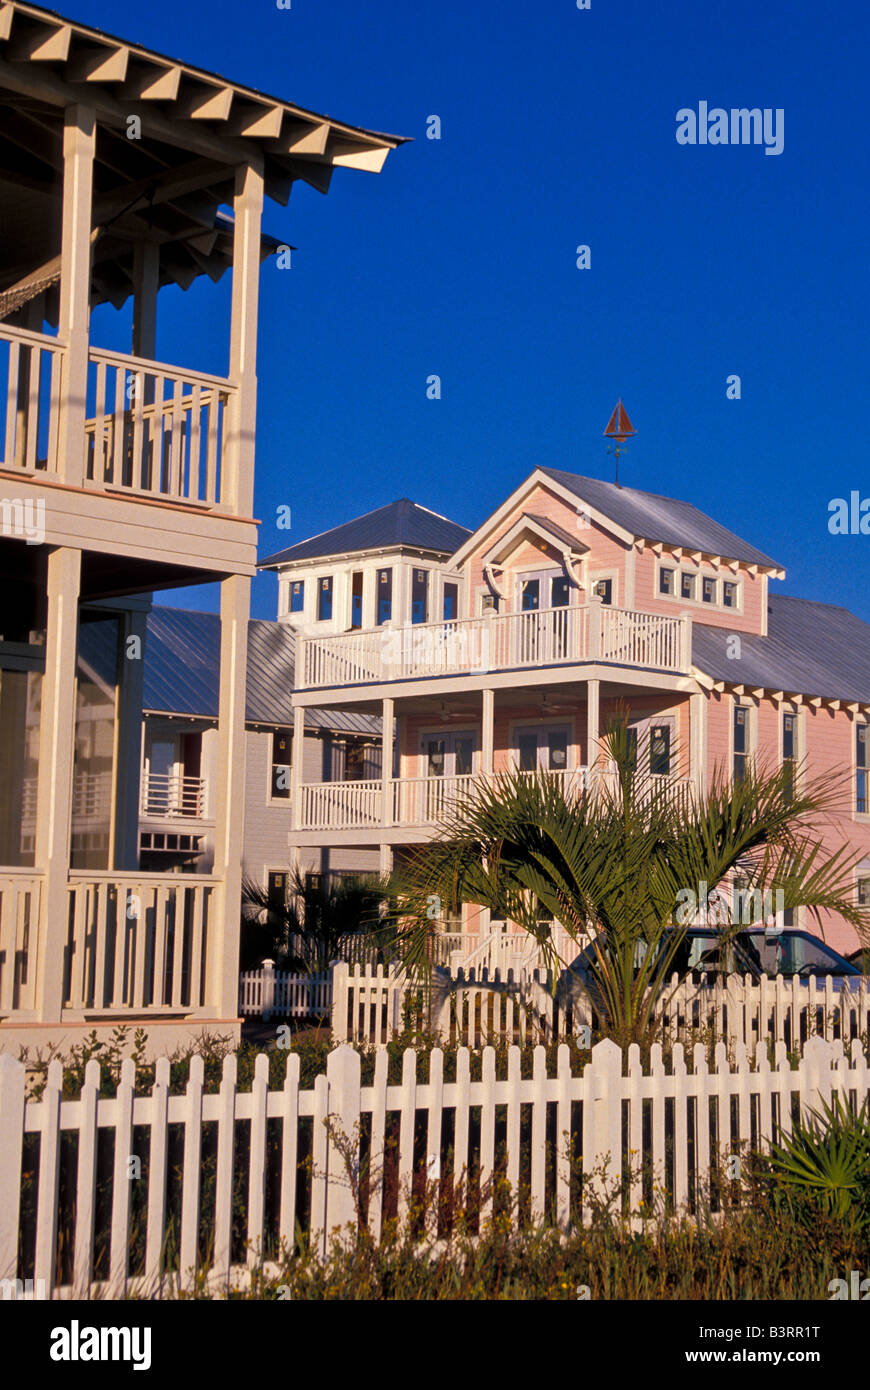 Seaside Florida first New Urbanist development a coastal master planned community with strict architectural standards Stock Photo